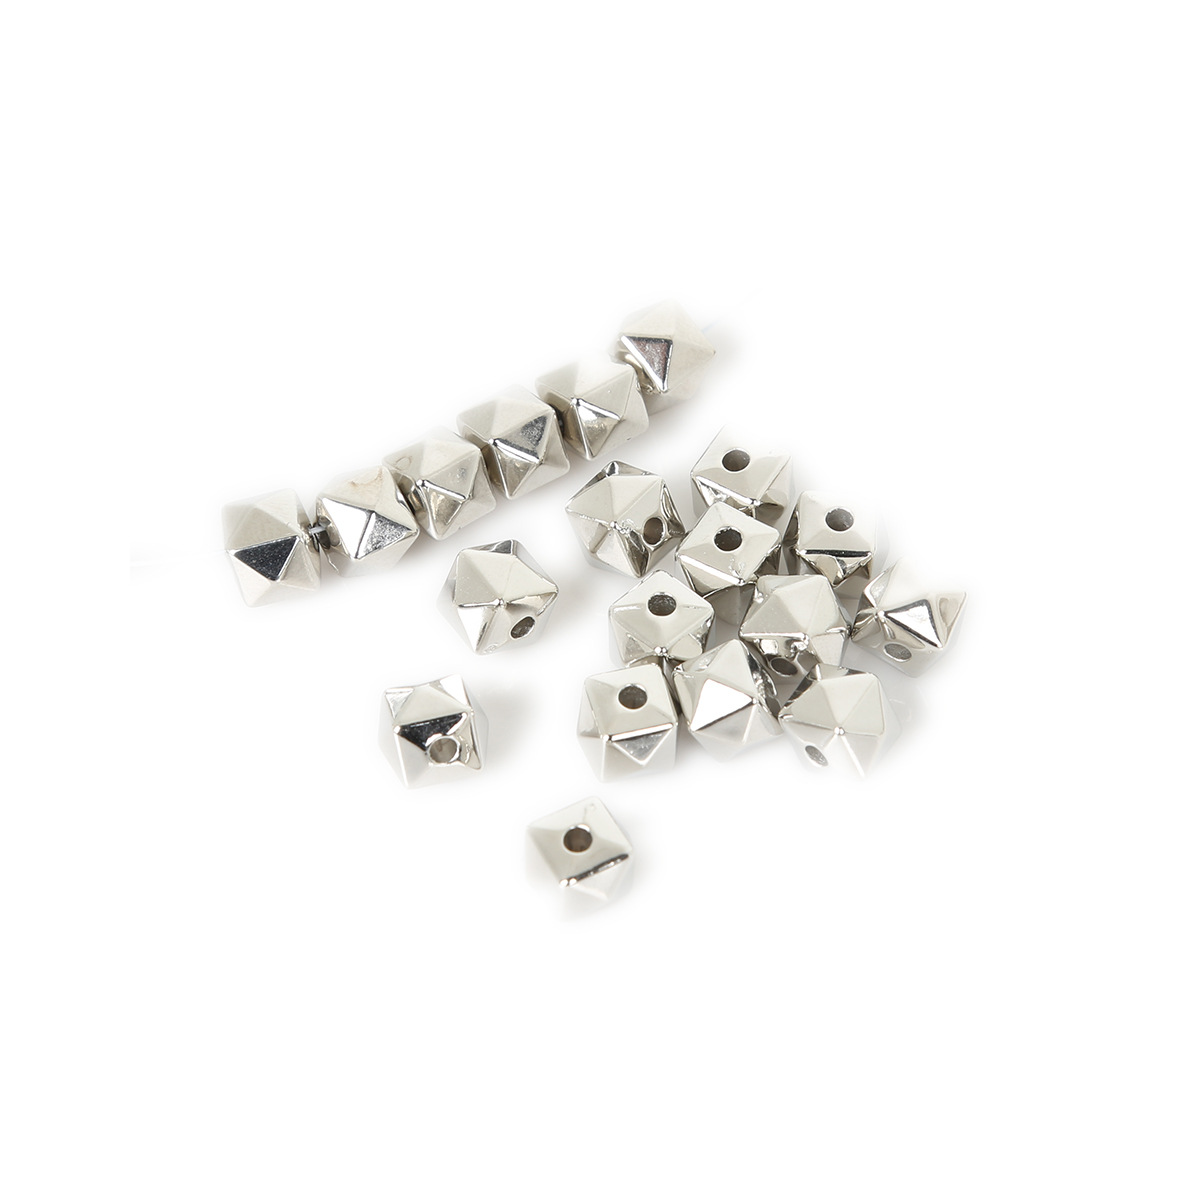 White K square beads 8 x 8 mm approximately 100 beads per pack